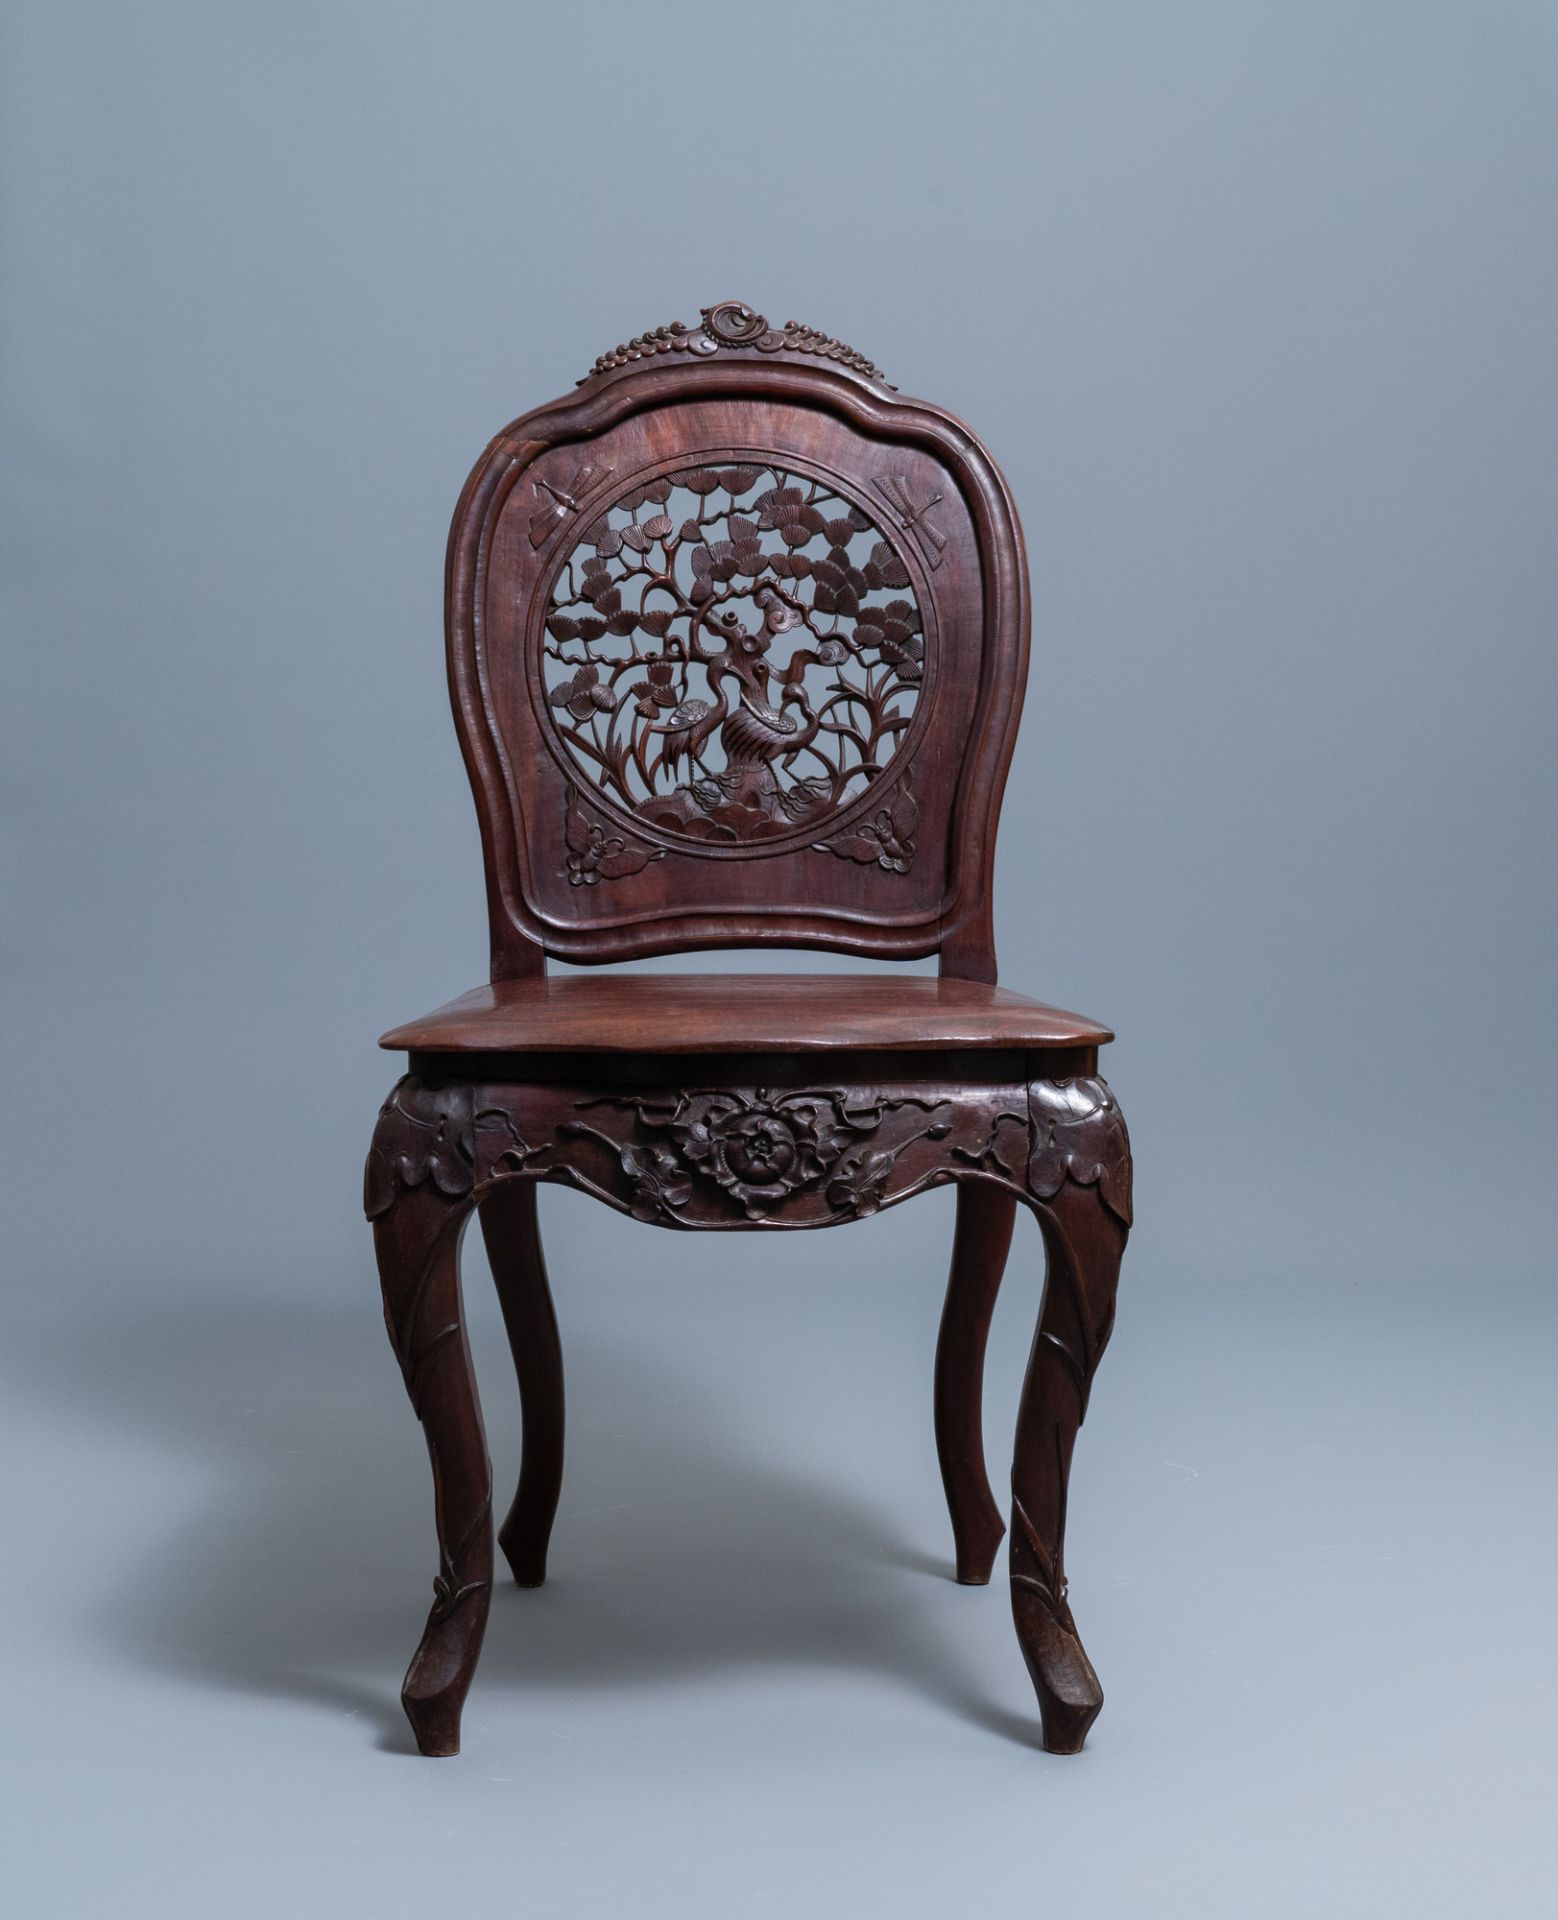 Four wooden chairs with reticulated backs, Macao or Portuguese colonial, 19th C. - Image 24 of 47